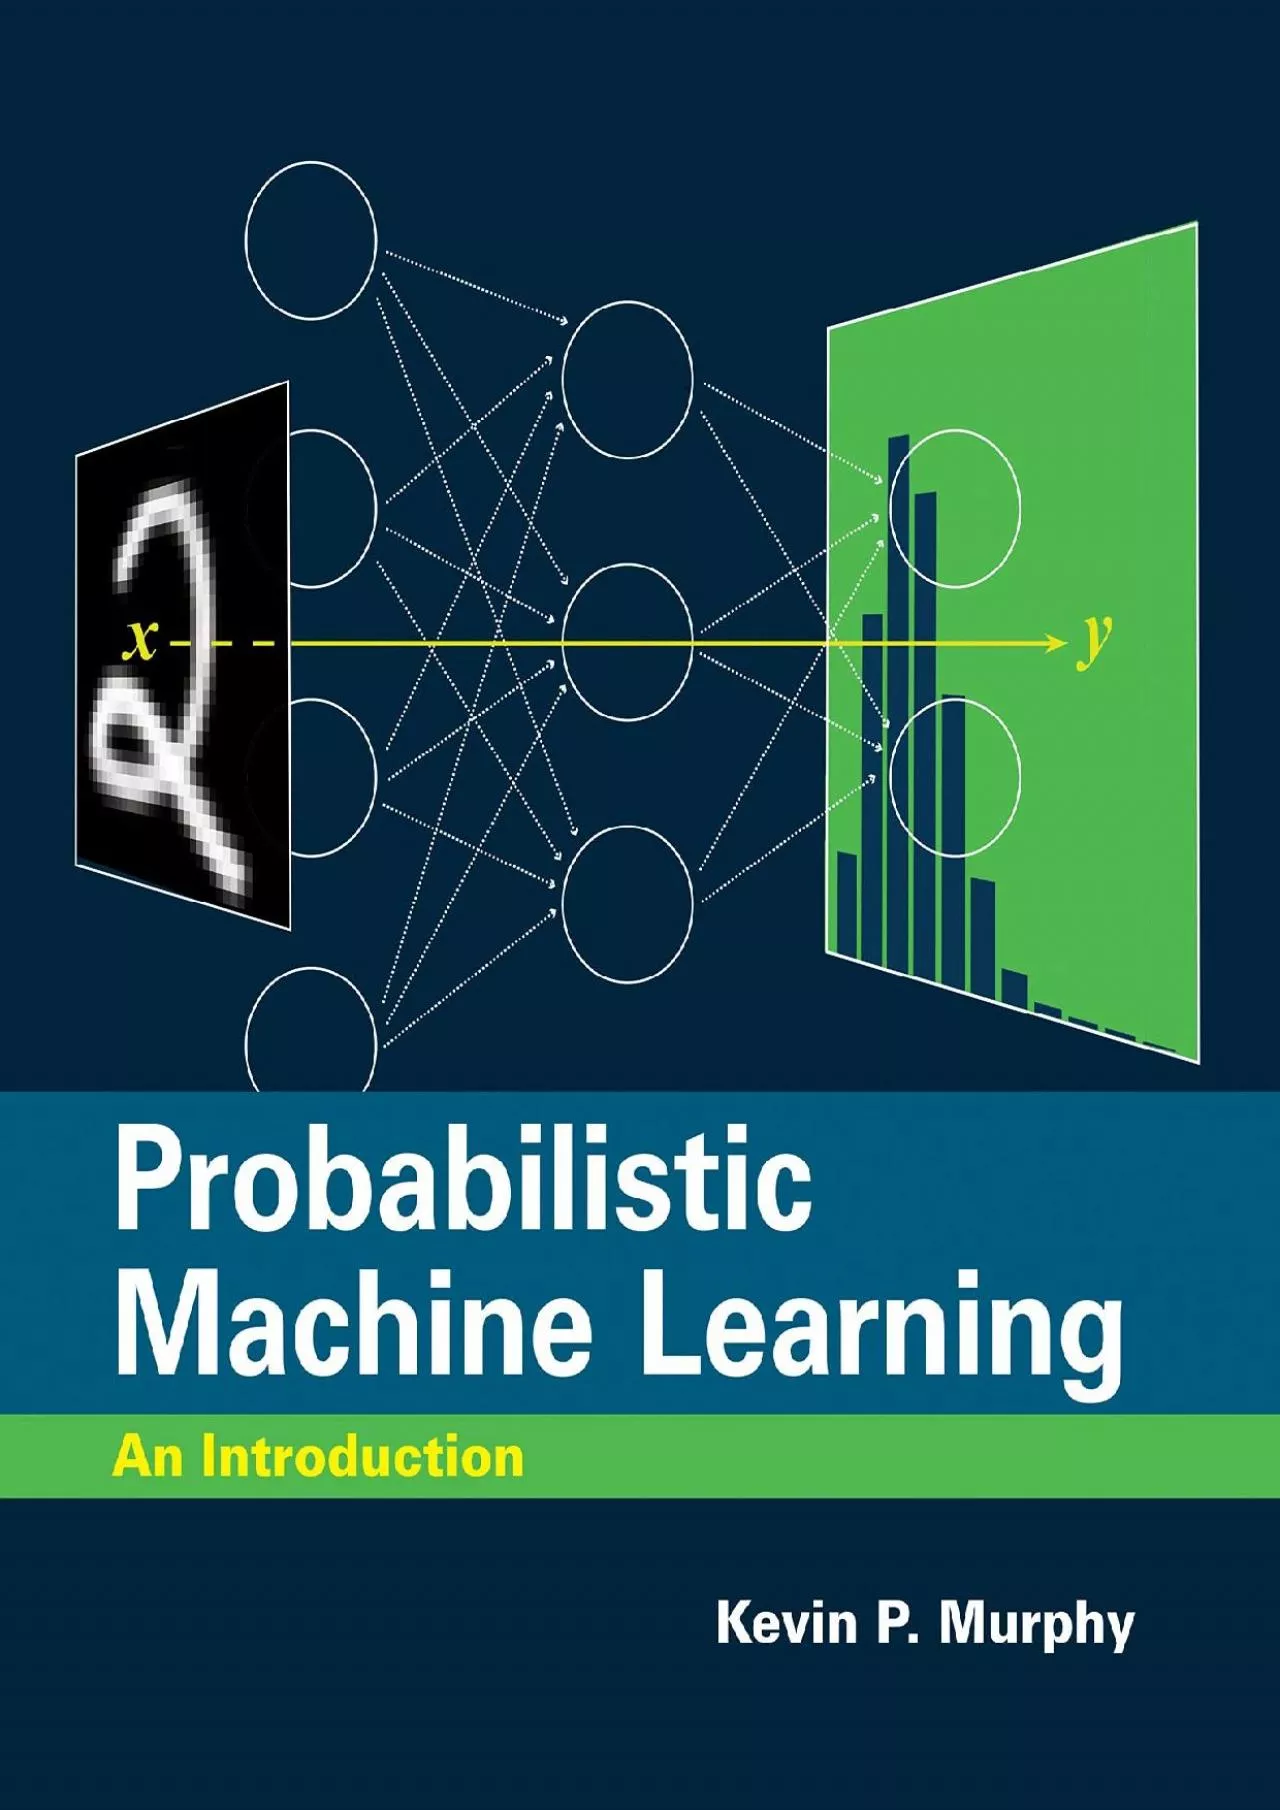 (DOWNLOAD)-Probabilistic Machine Learning: An Introduction (Adaptive Computation and Machine